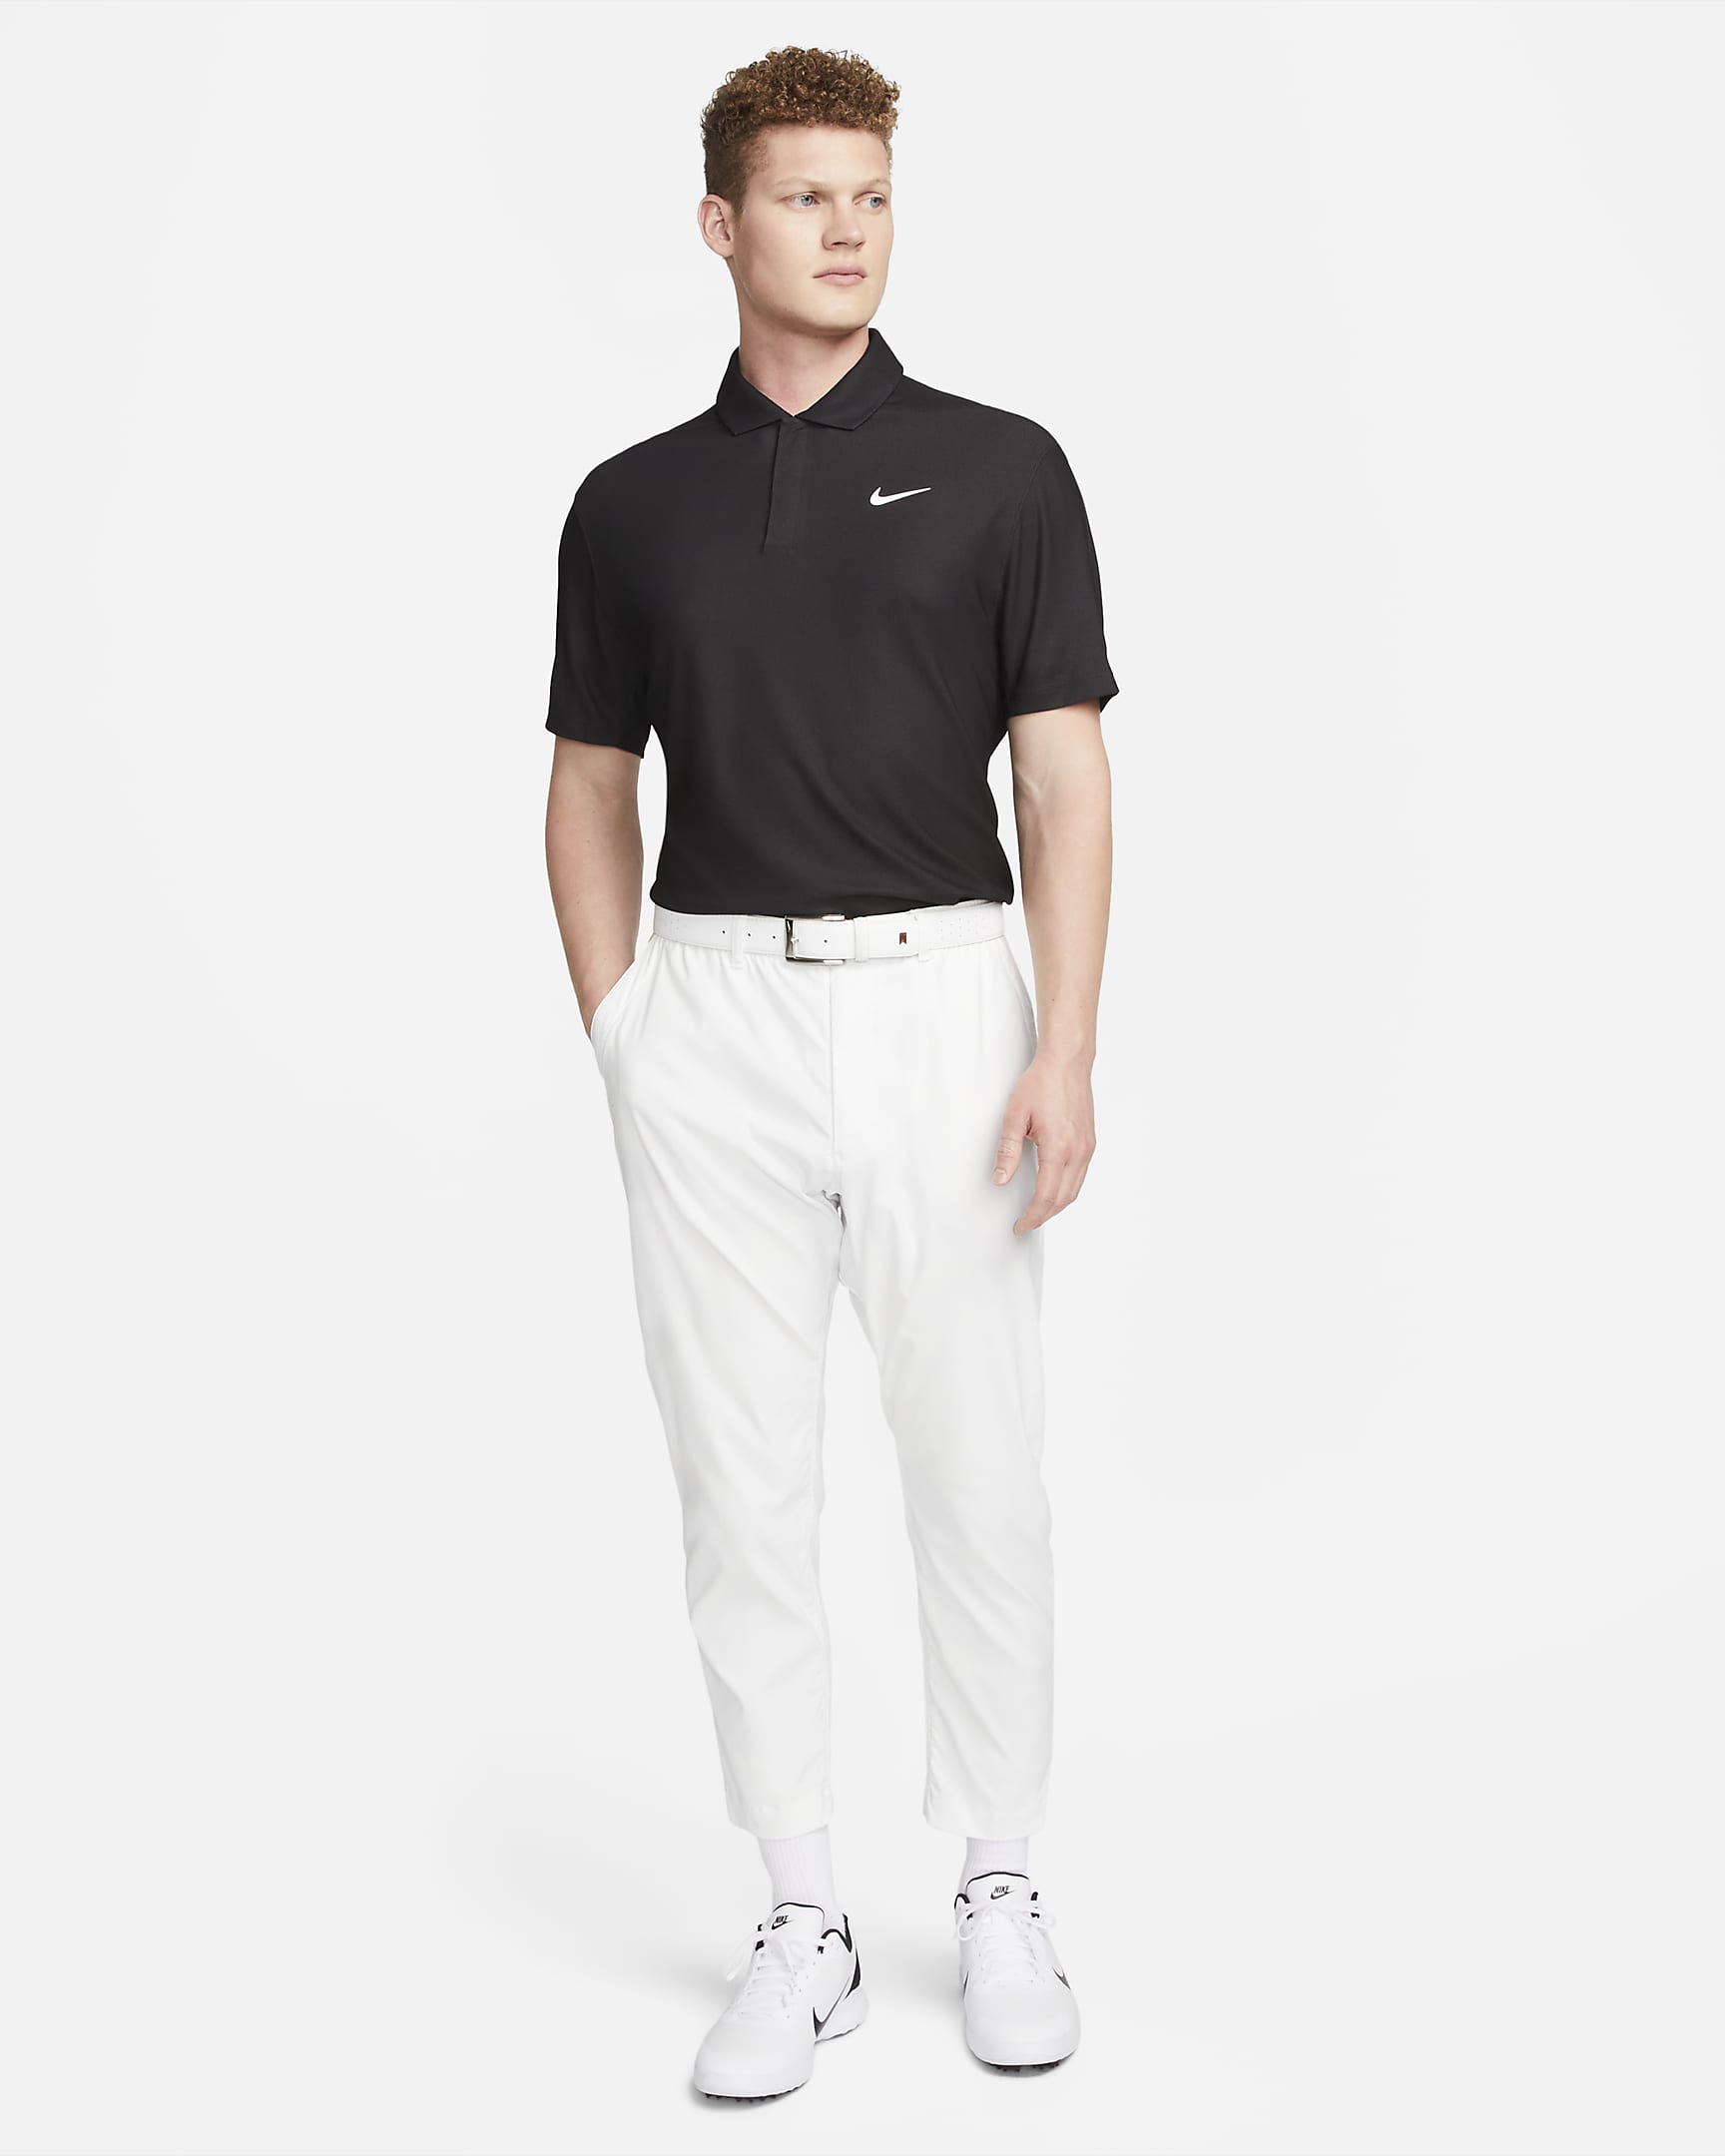 Nike Dri-FIT Tiger Woods Men's Golf Polo. Nike AT